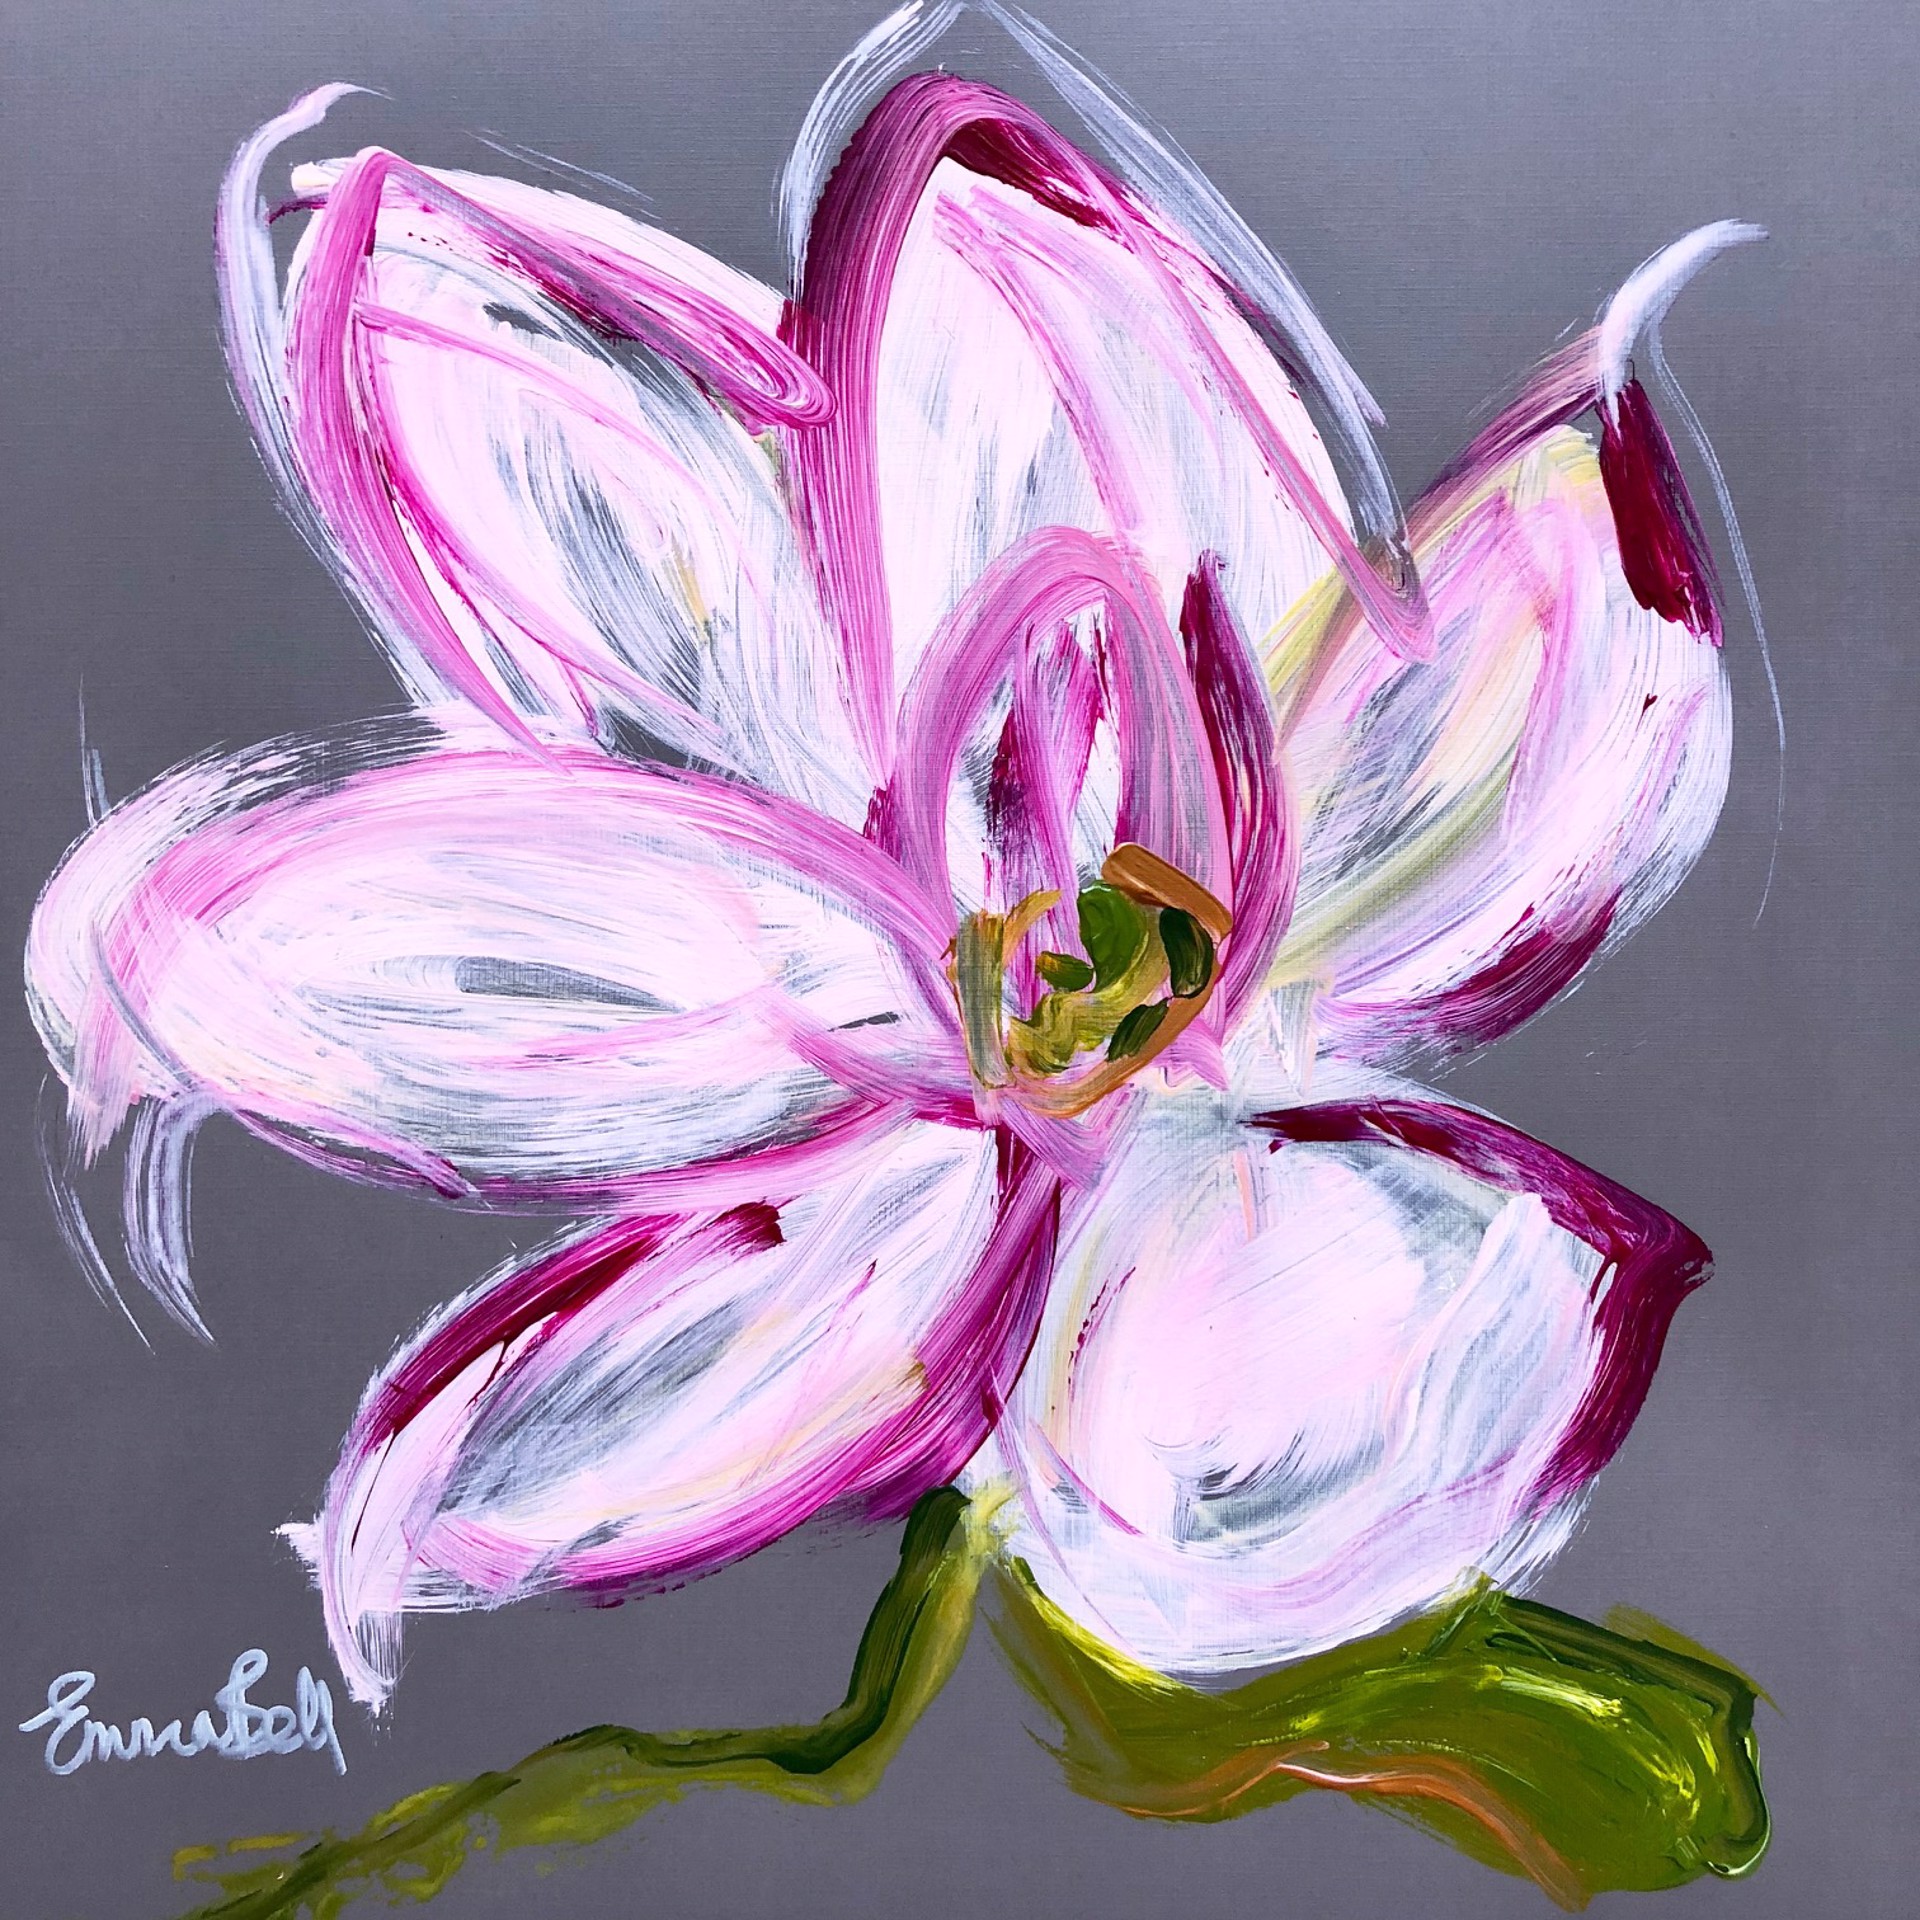 Pink Magnolia I by Emma Bell